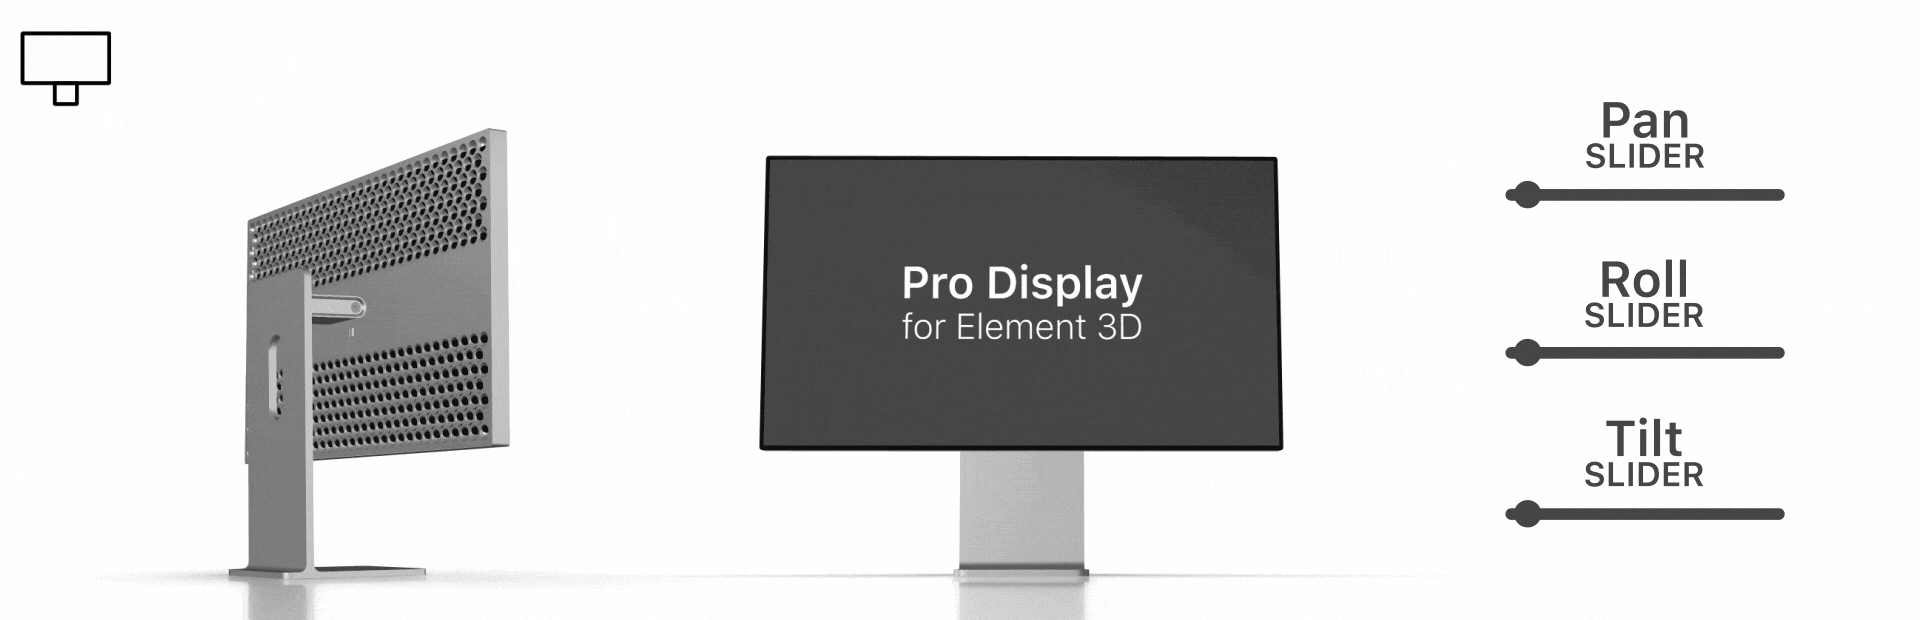 Pro Display for Element 3D - 5